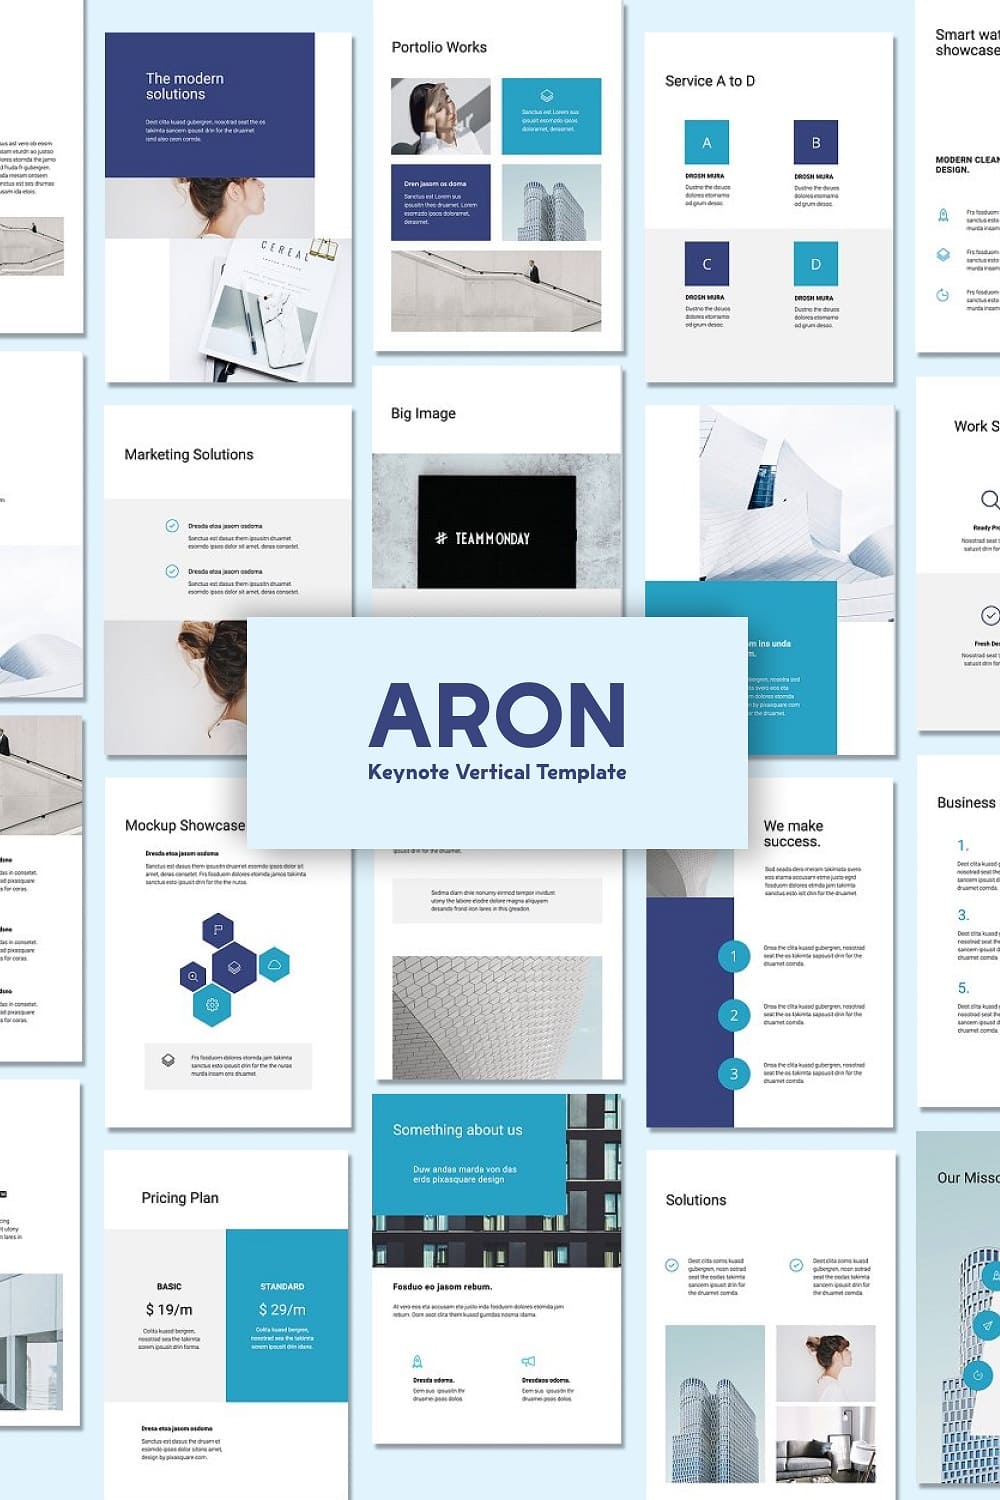 Aron vertical keynote template picture for Pinterest.